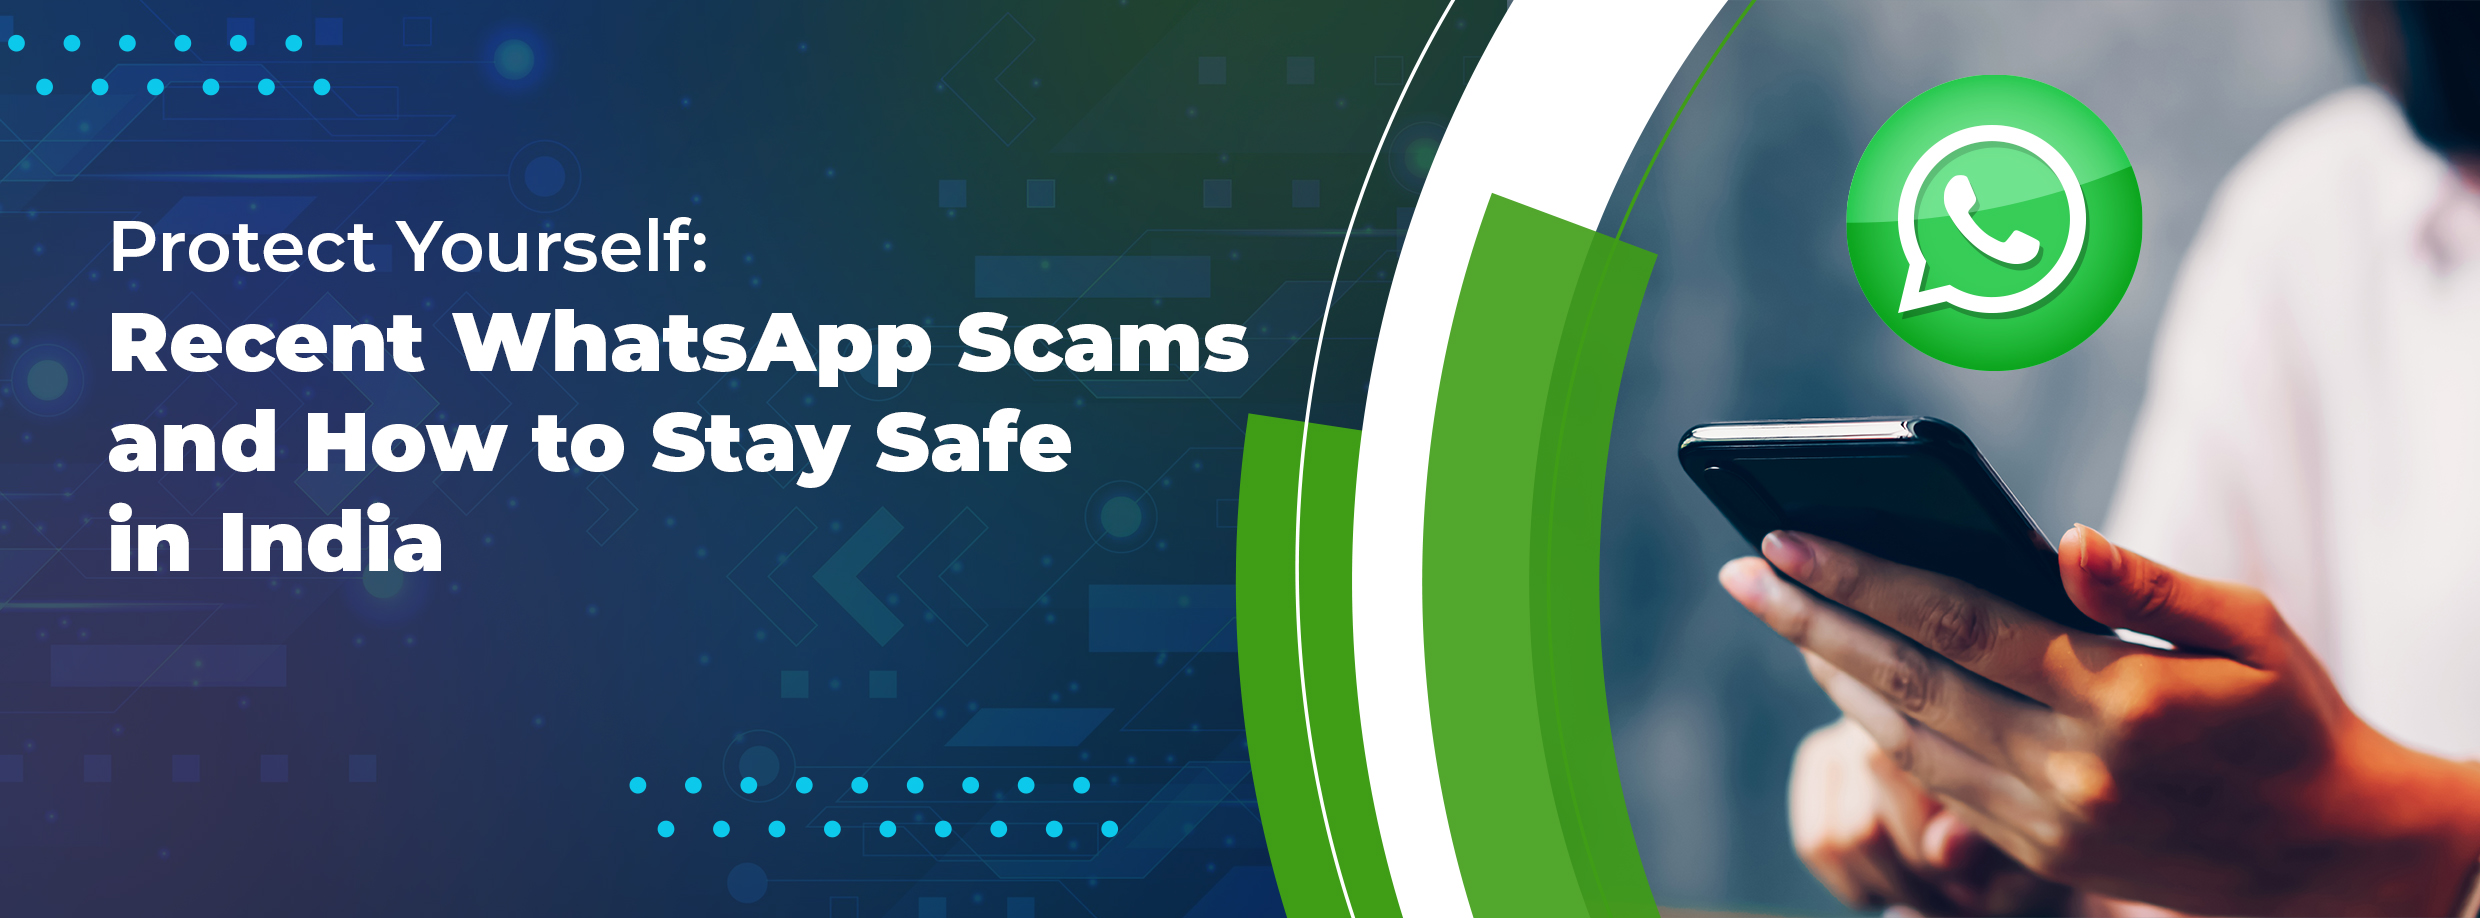 https://stratus.campaign-image.in/images/133670000000167383_zc_v1_1687870512613_recent_whatsapp_scams_and_how_to_stay_safe_in_india_banner.jpg